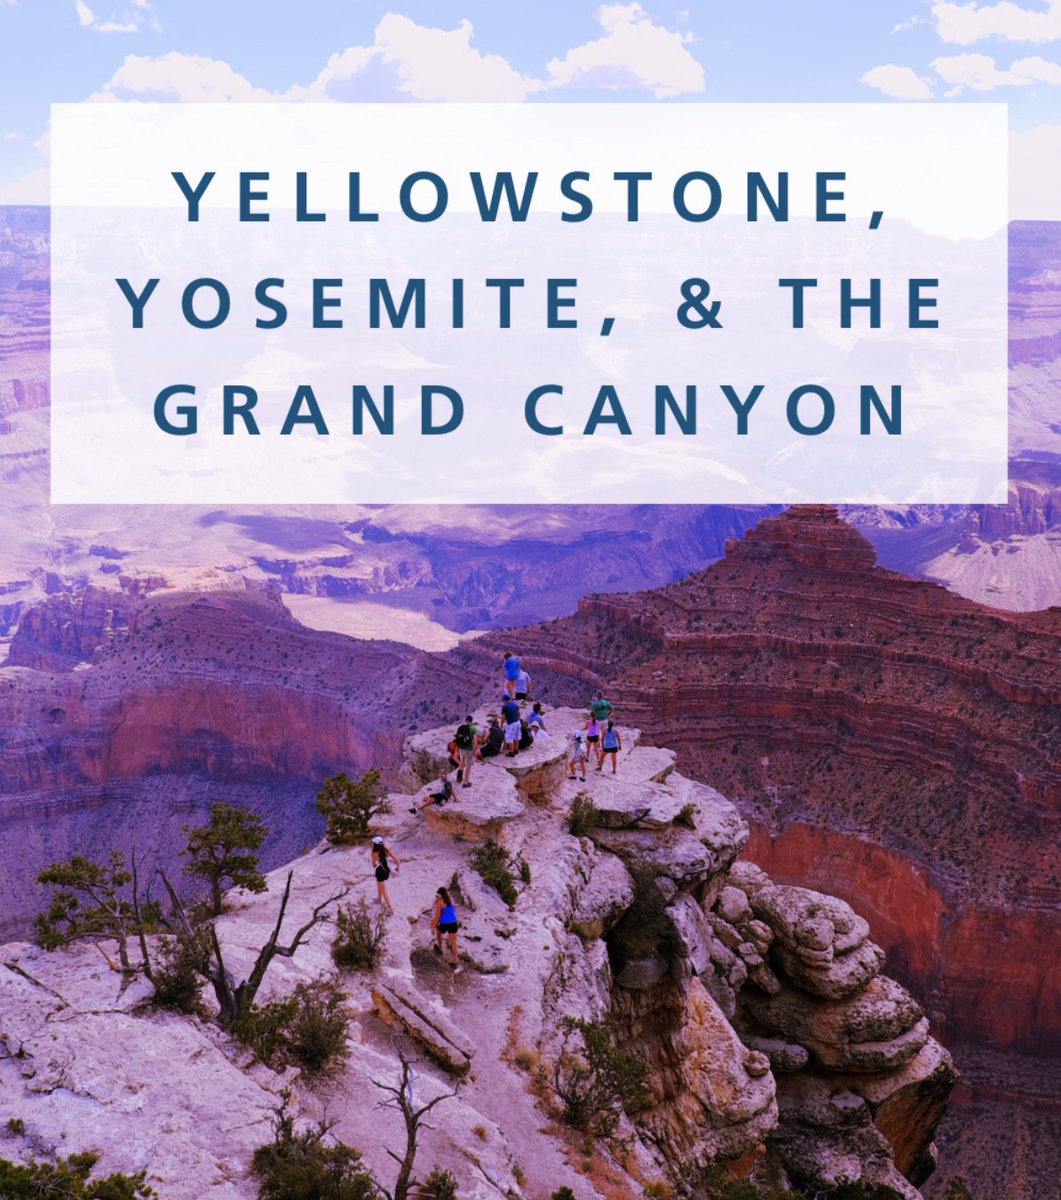 Three of the nation's greatest national parks await you on this rail journey across America!
This trip is all customizable to fit your travel needs!  Contact KJH World Travel today when ready for an adventure!  #VisitYellowstone #VisitYosemite #VisitGrandCanyon #Kjhworldtravel